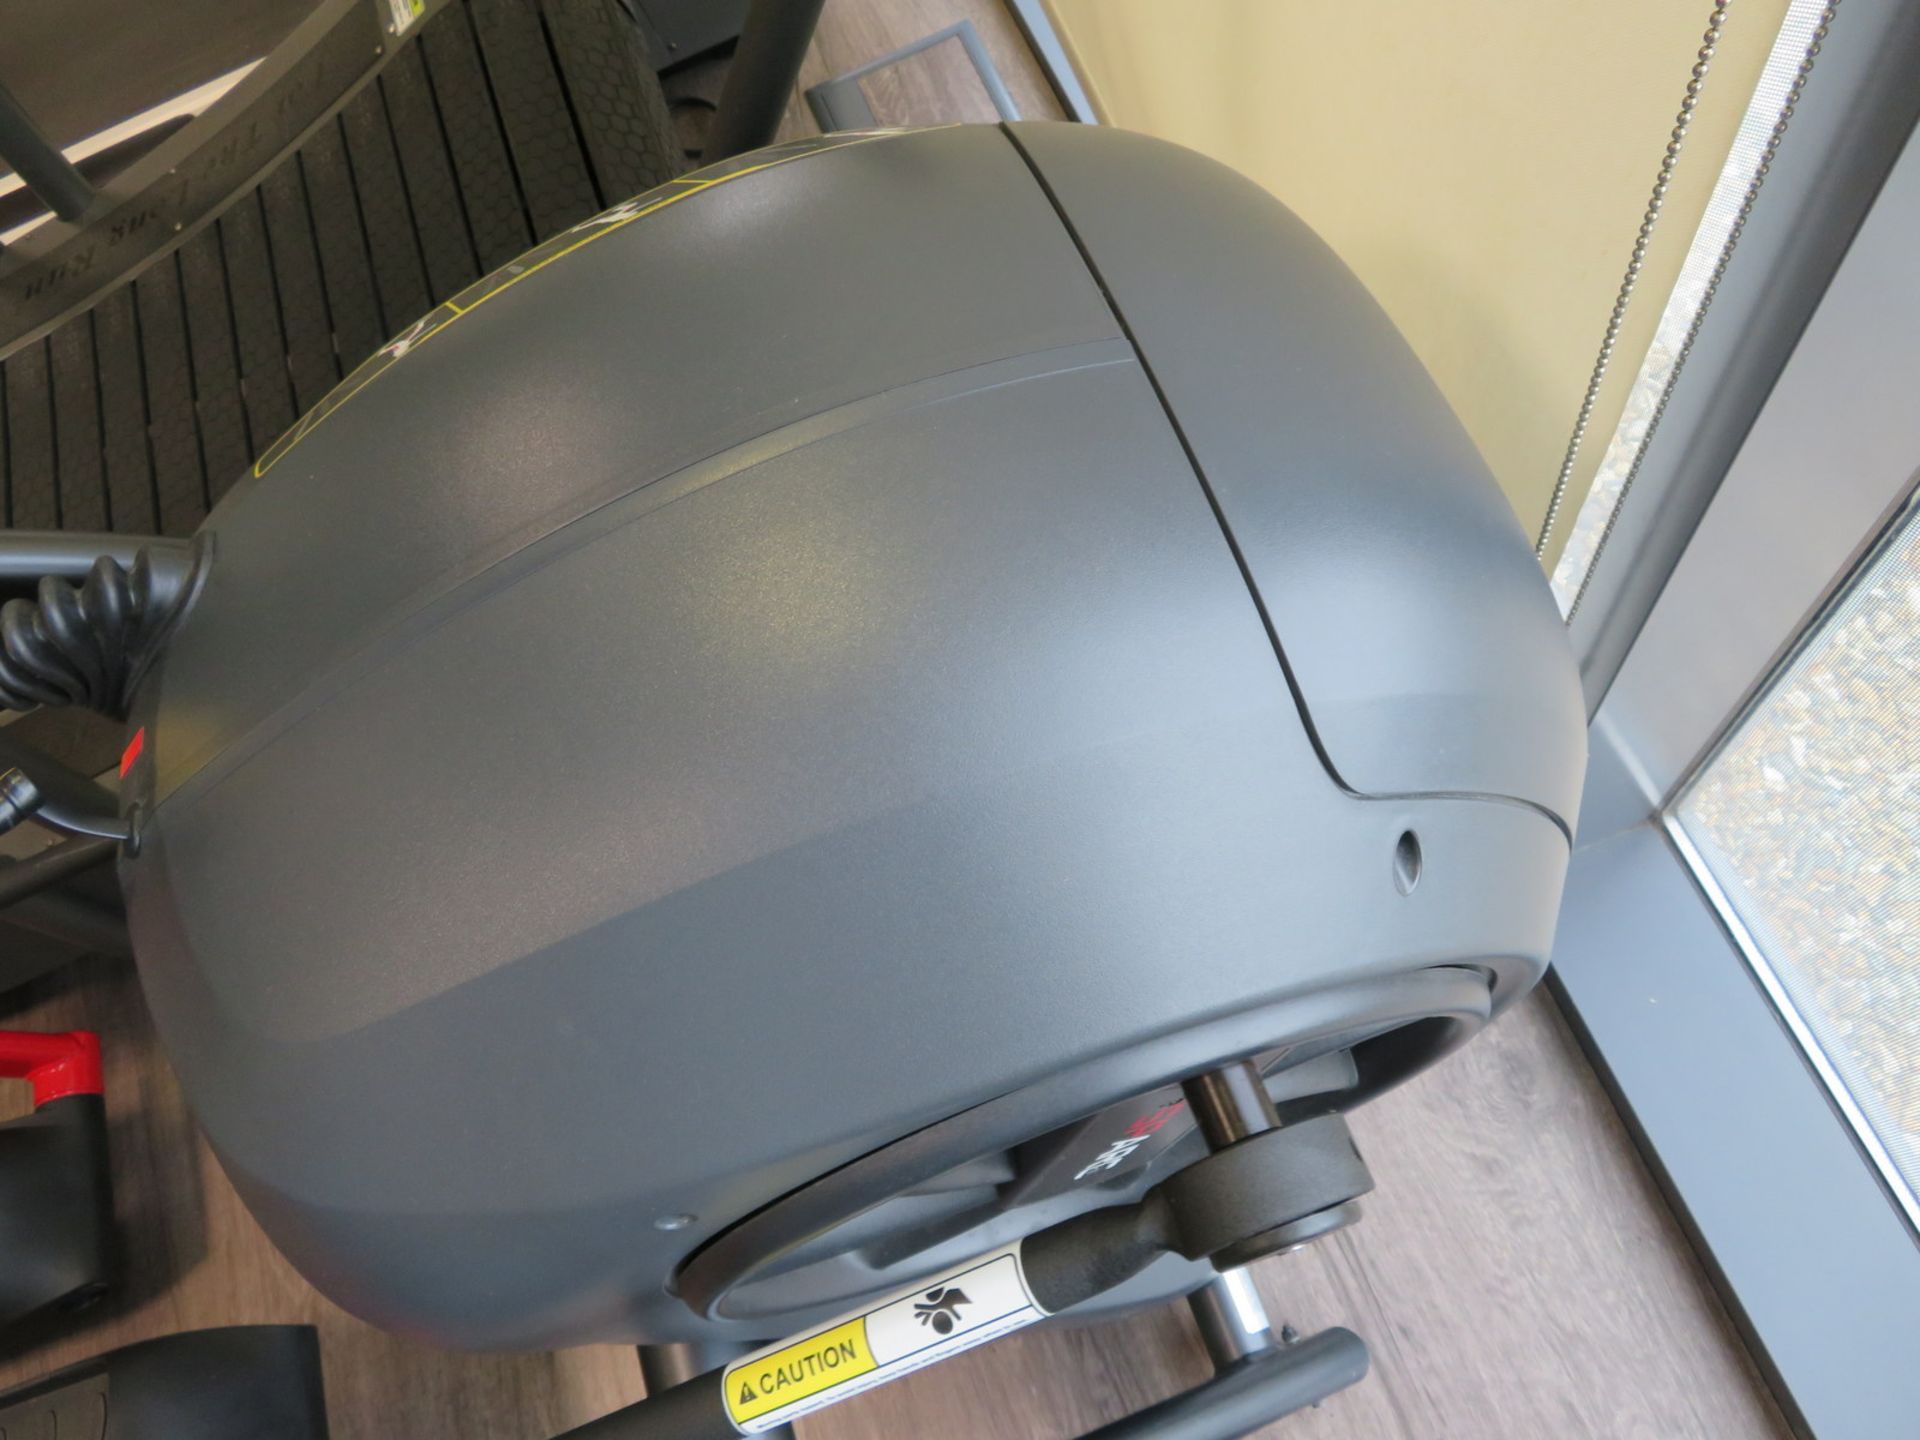 Cybex SP ARC High Intensity Trainer. Digital Display. Good Working Condition. - Image 8 of 9